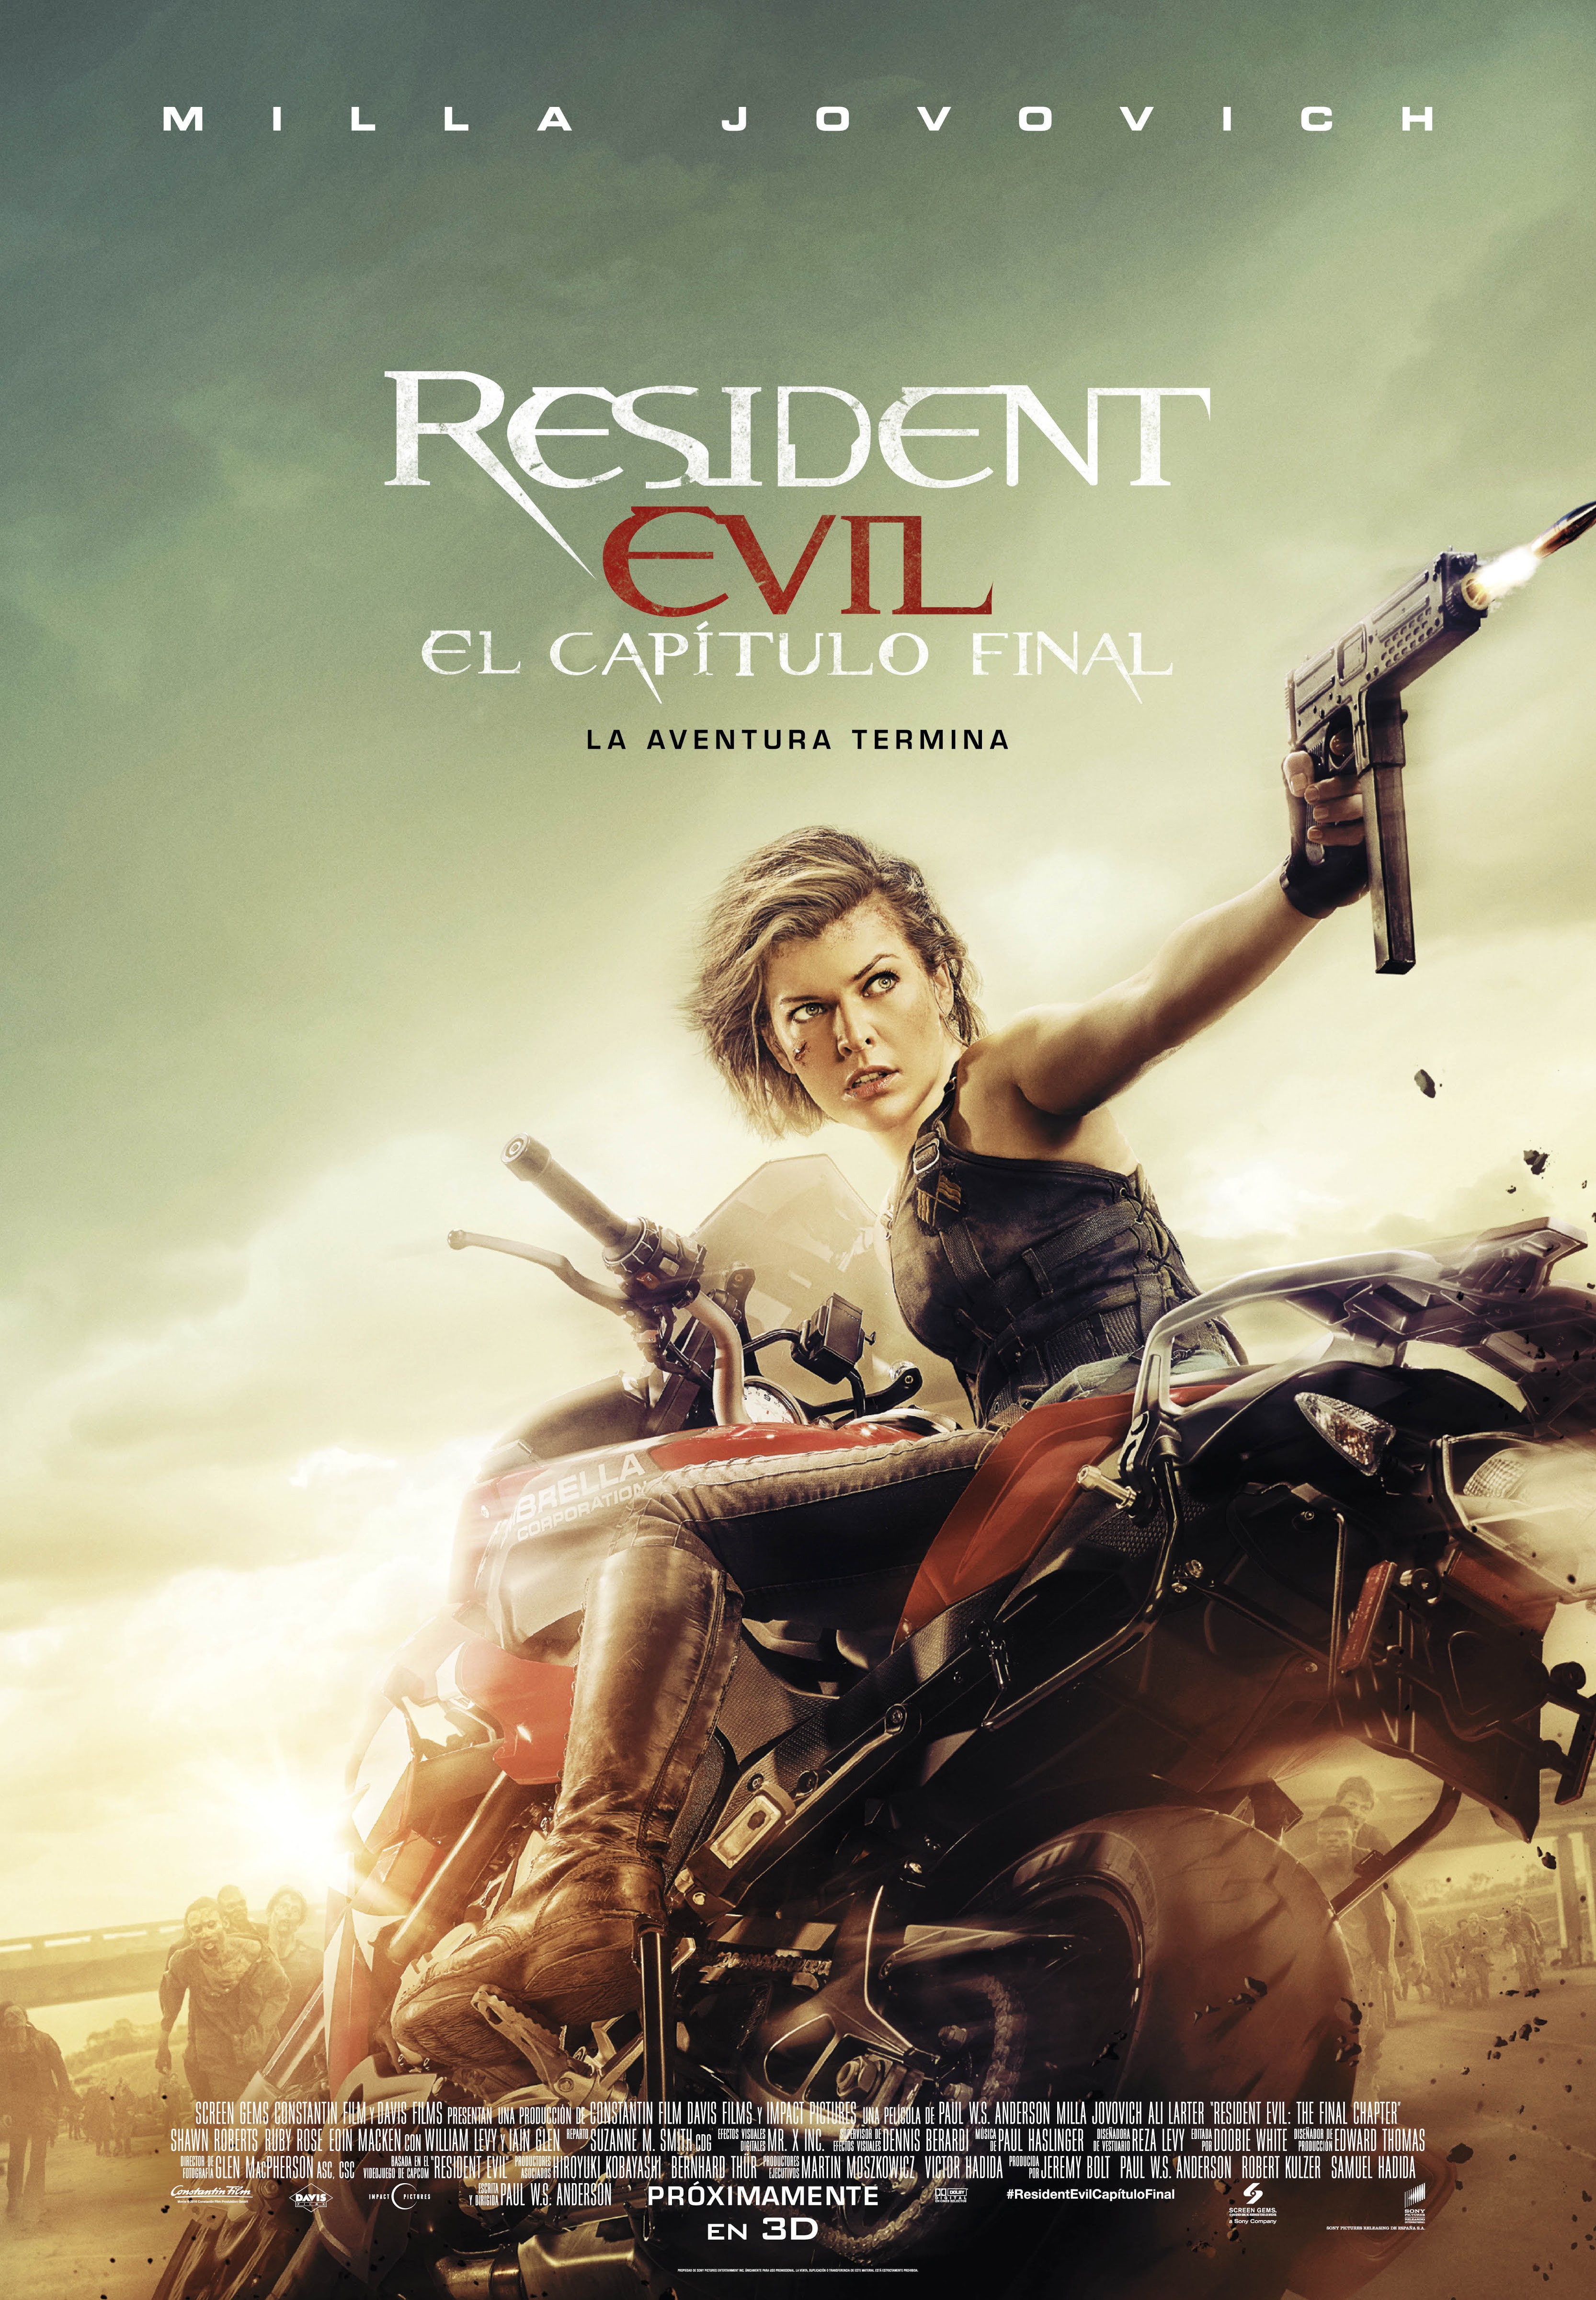 Resident Evil: The Final Chapter', reparto definitivo y sinopsis oficial –